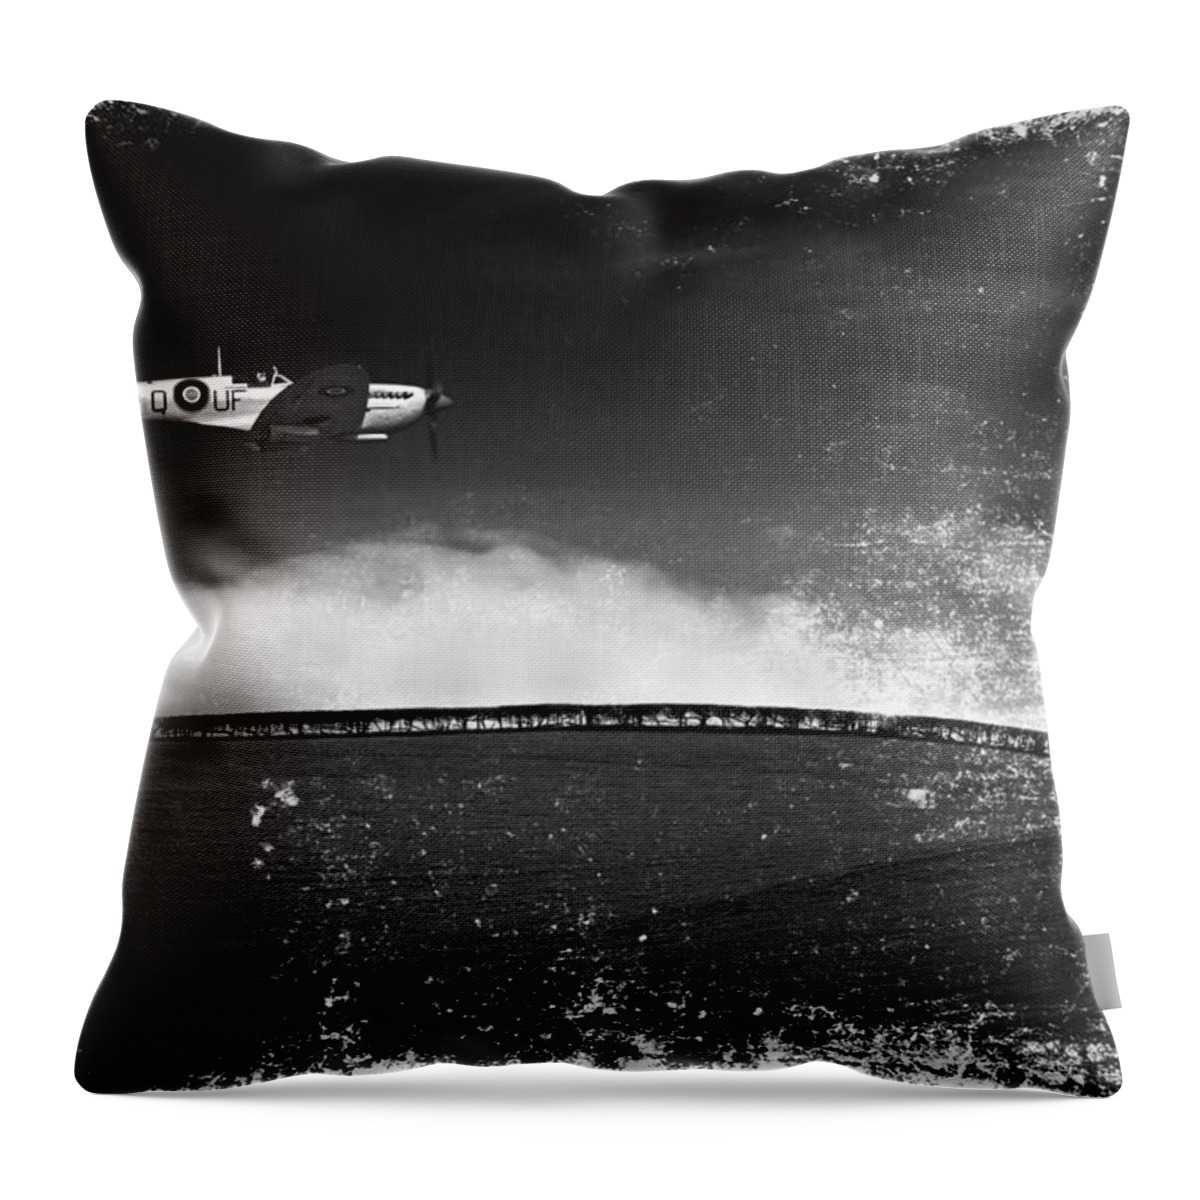 Spitfire Throw Pillow featuring the photograph Distressed Spitfire by Meirion Matthias